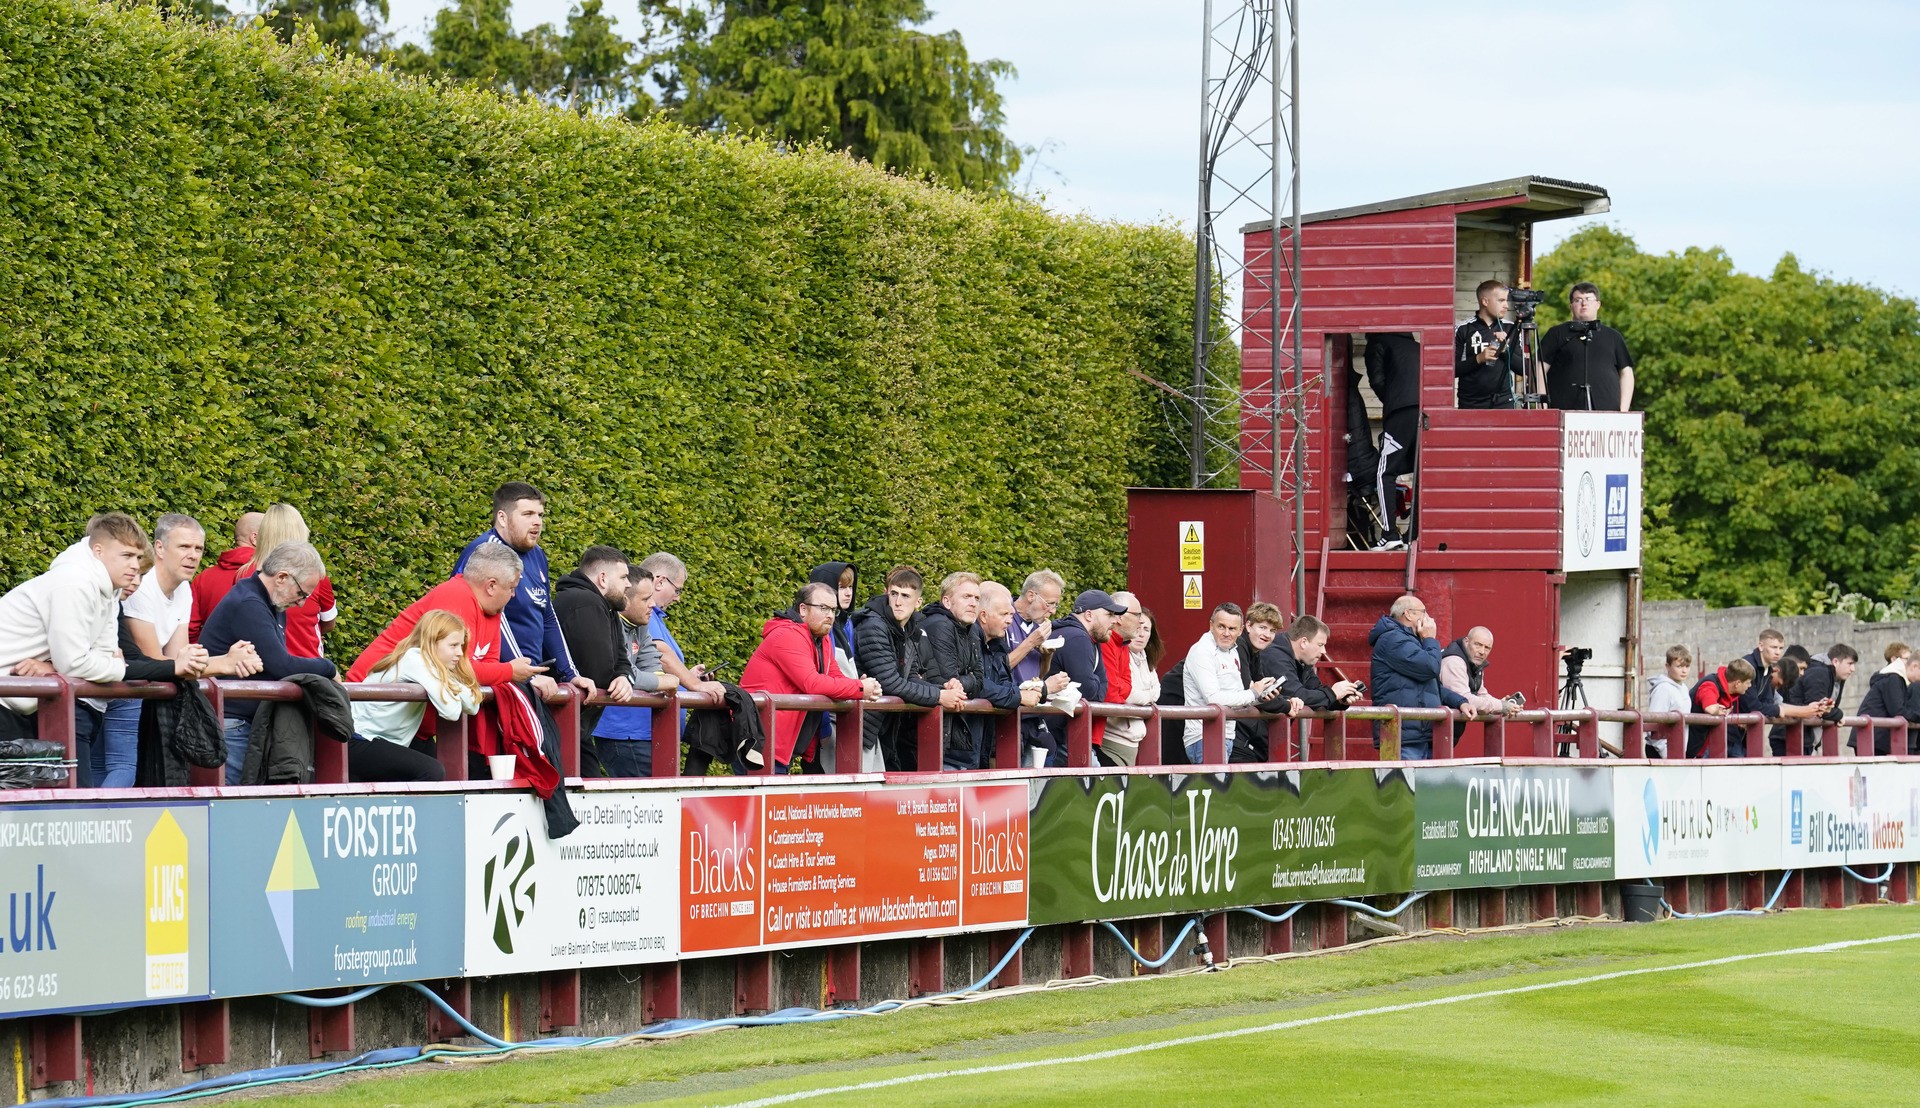 The Glebe Park hedge could make its return to League Two. (Photo by Simon Wootton / SNS Group)